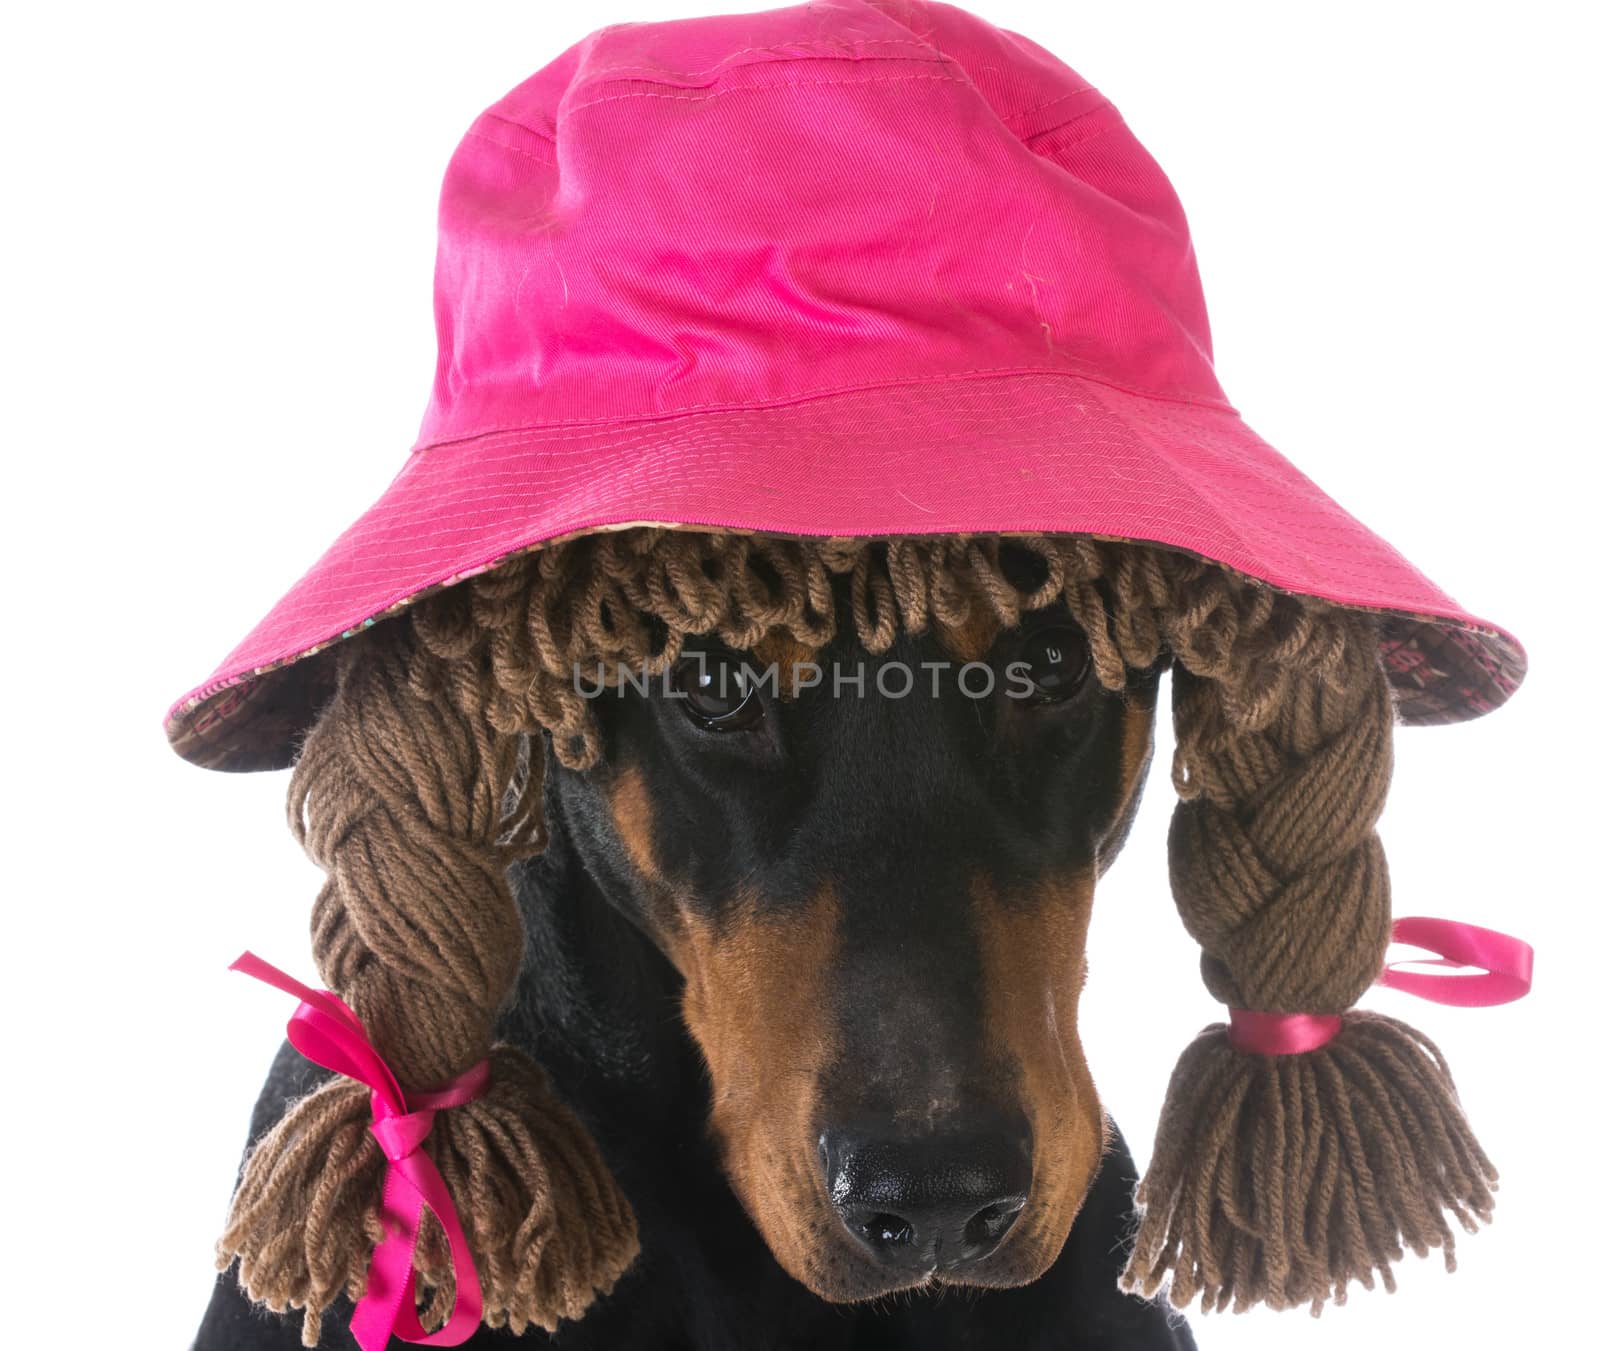 female dog - doberman pinscher wearing silly wig and hat on white background